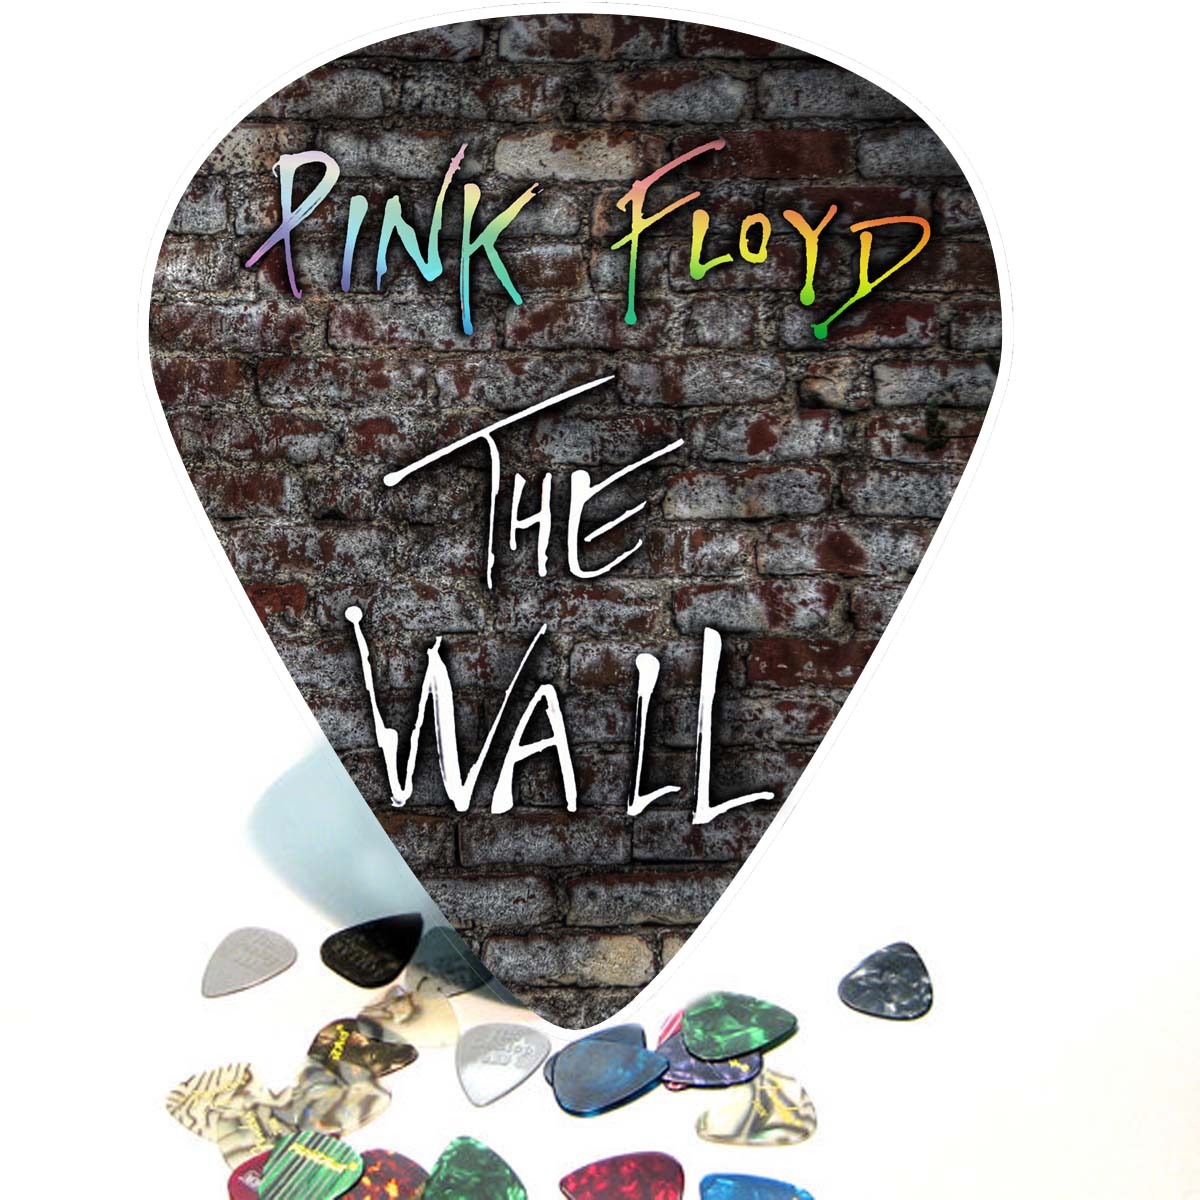 Pink Floyd - The Wall Giant Guitar Pick Wall Art - 1086